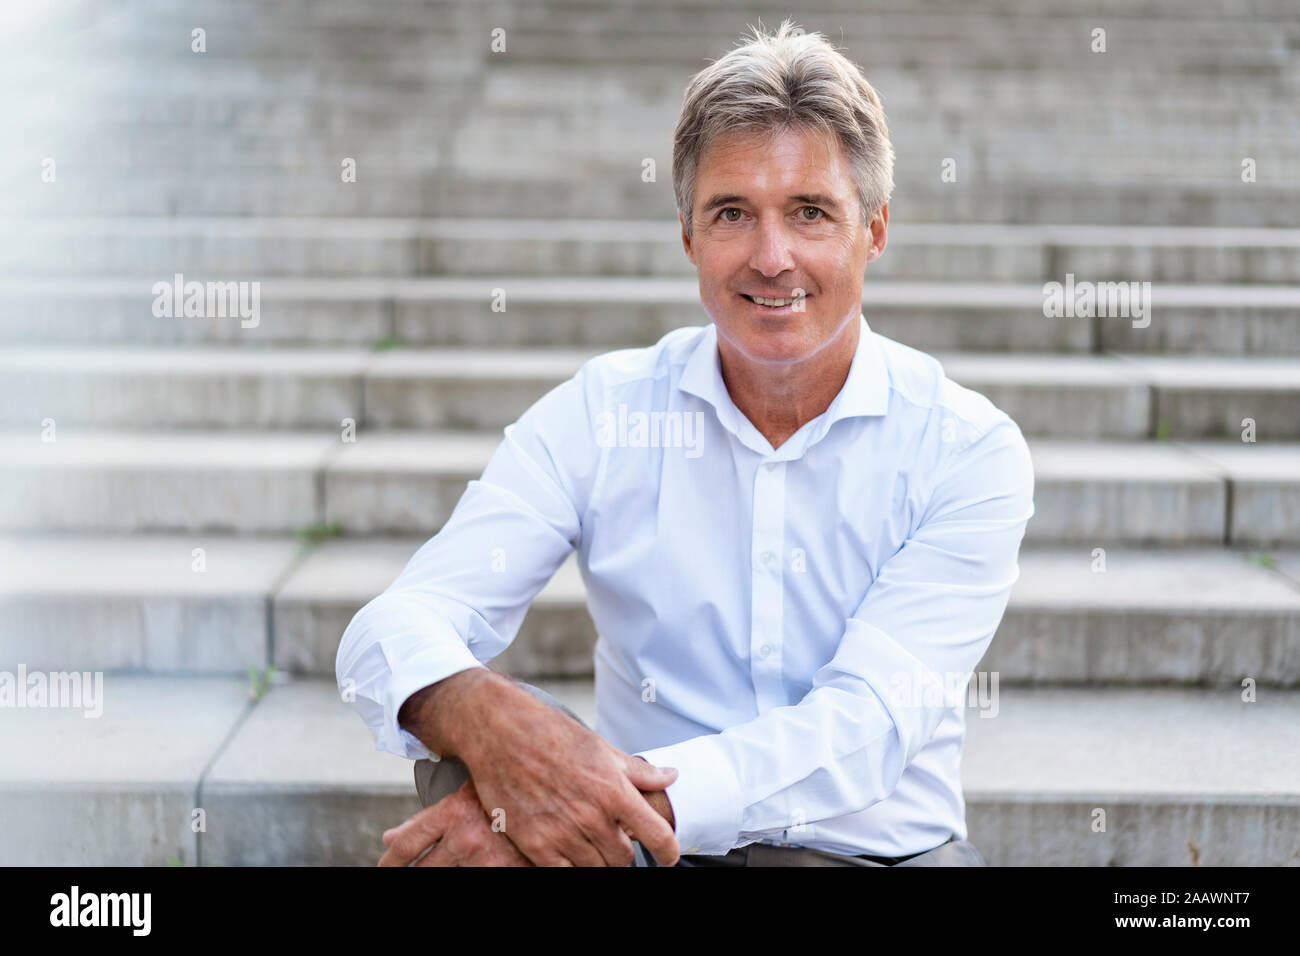 Portrait of mature businessman sitting on stairs Banque D'Images